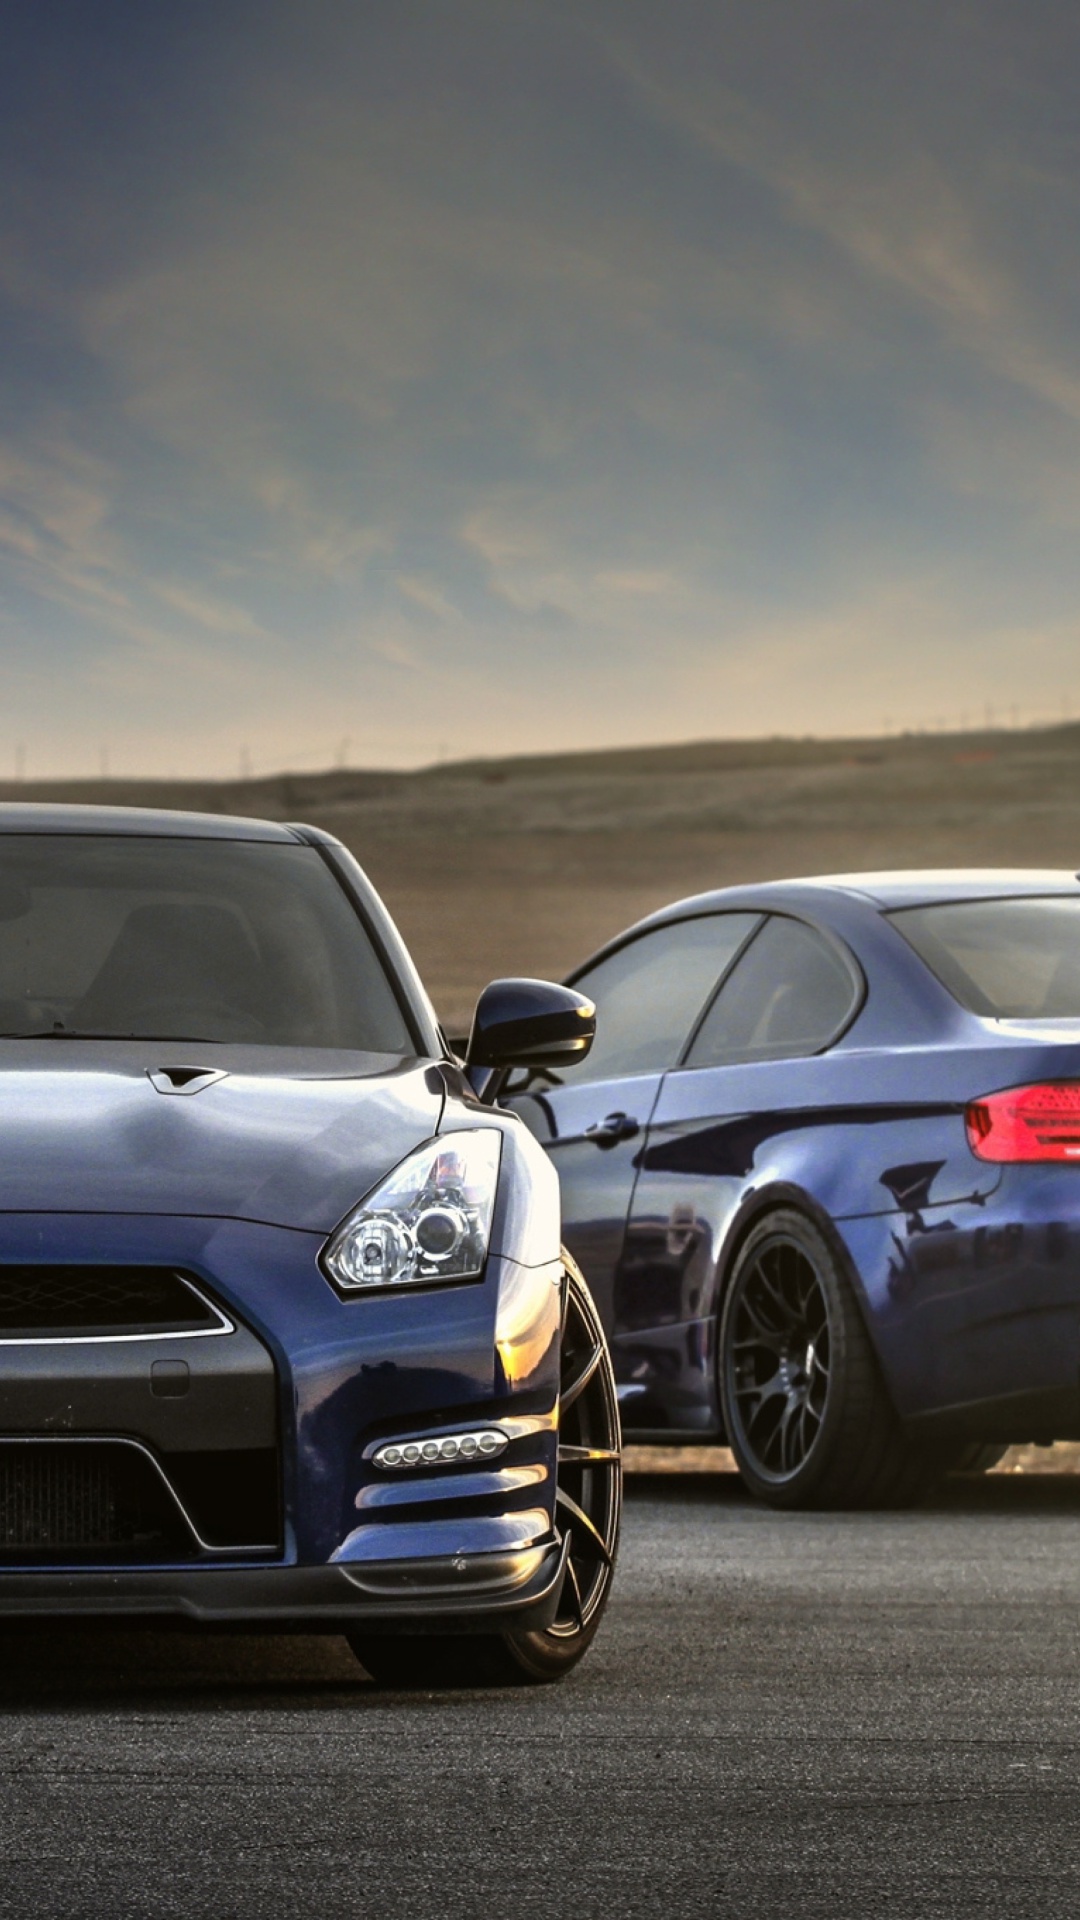 Free Download Nissan Gtr And Bmw M3 E92 Wallpaper For Iphone 6 Plus 1080x1920 For Your Desktop Mobile Tablet Explore 98 Bmw E46 M3 Gtr Wallpapers Bmw E46 M3